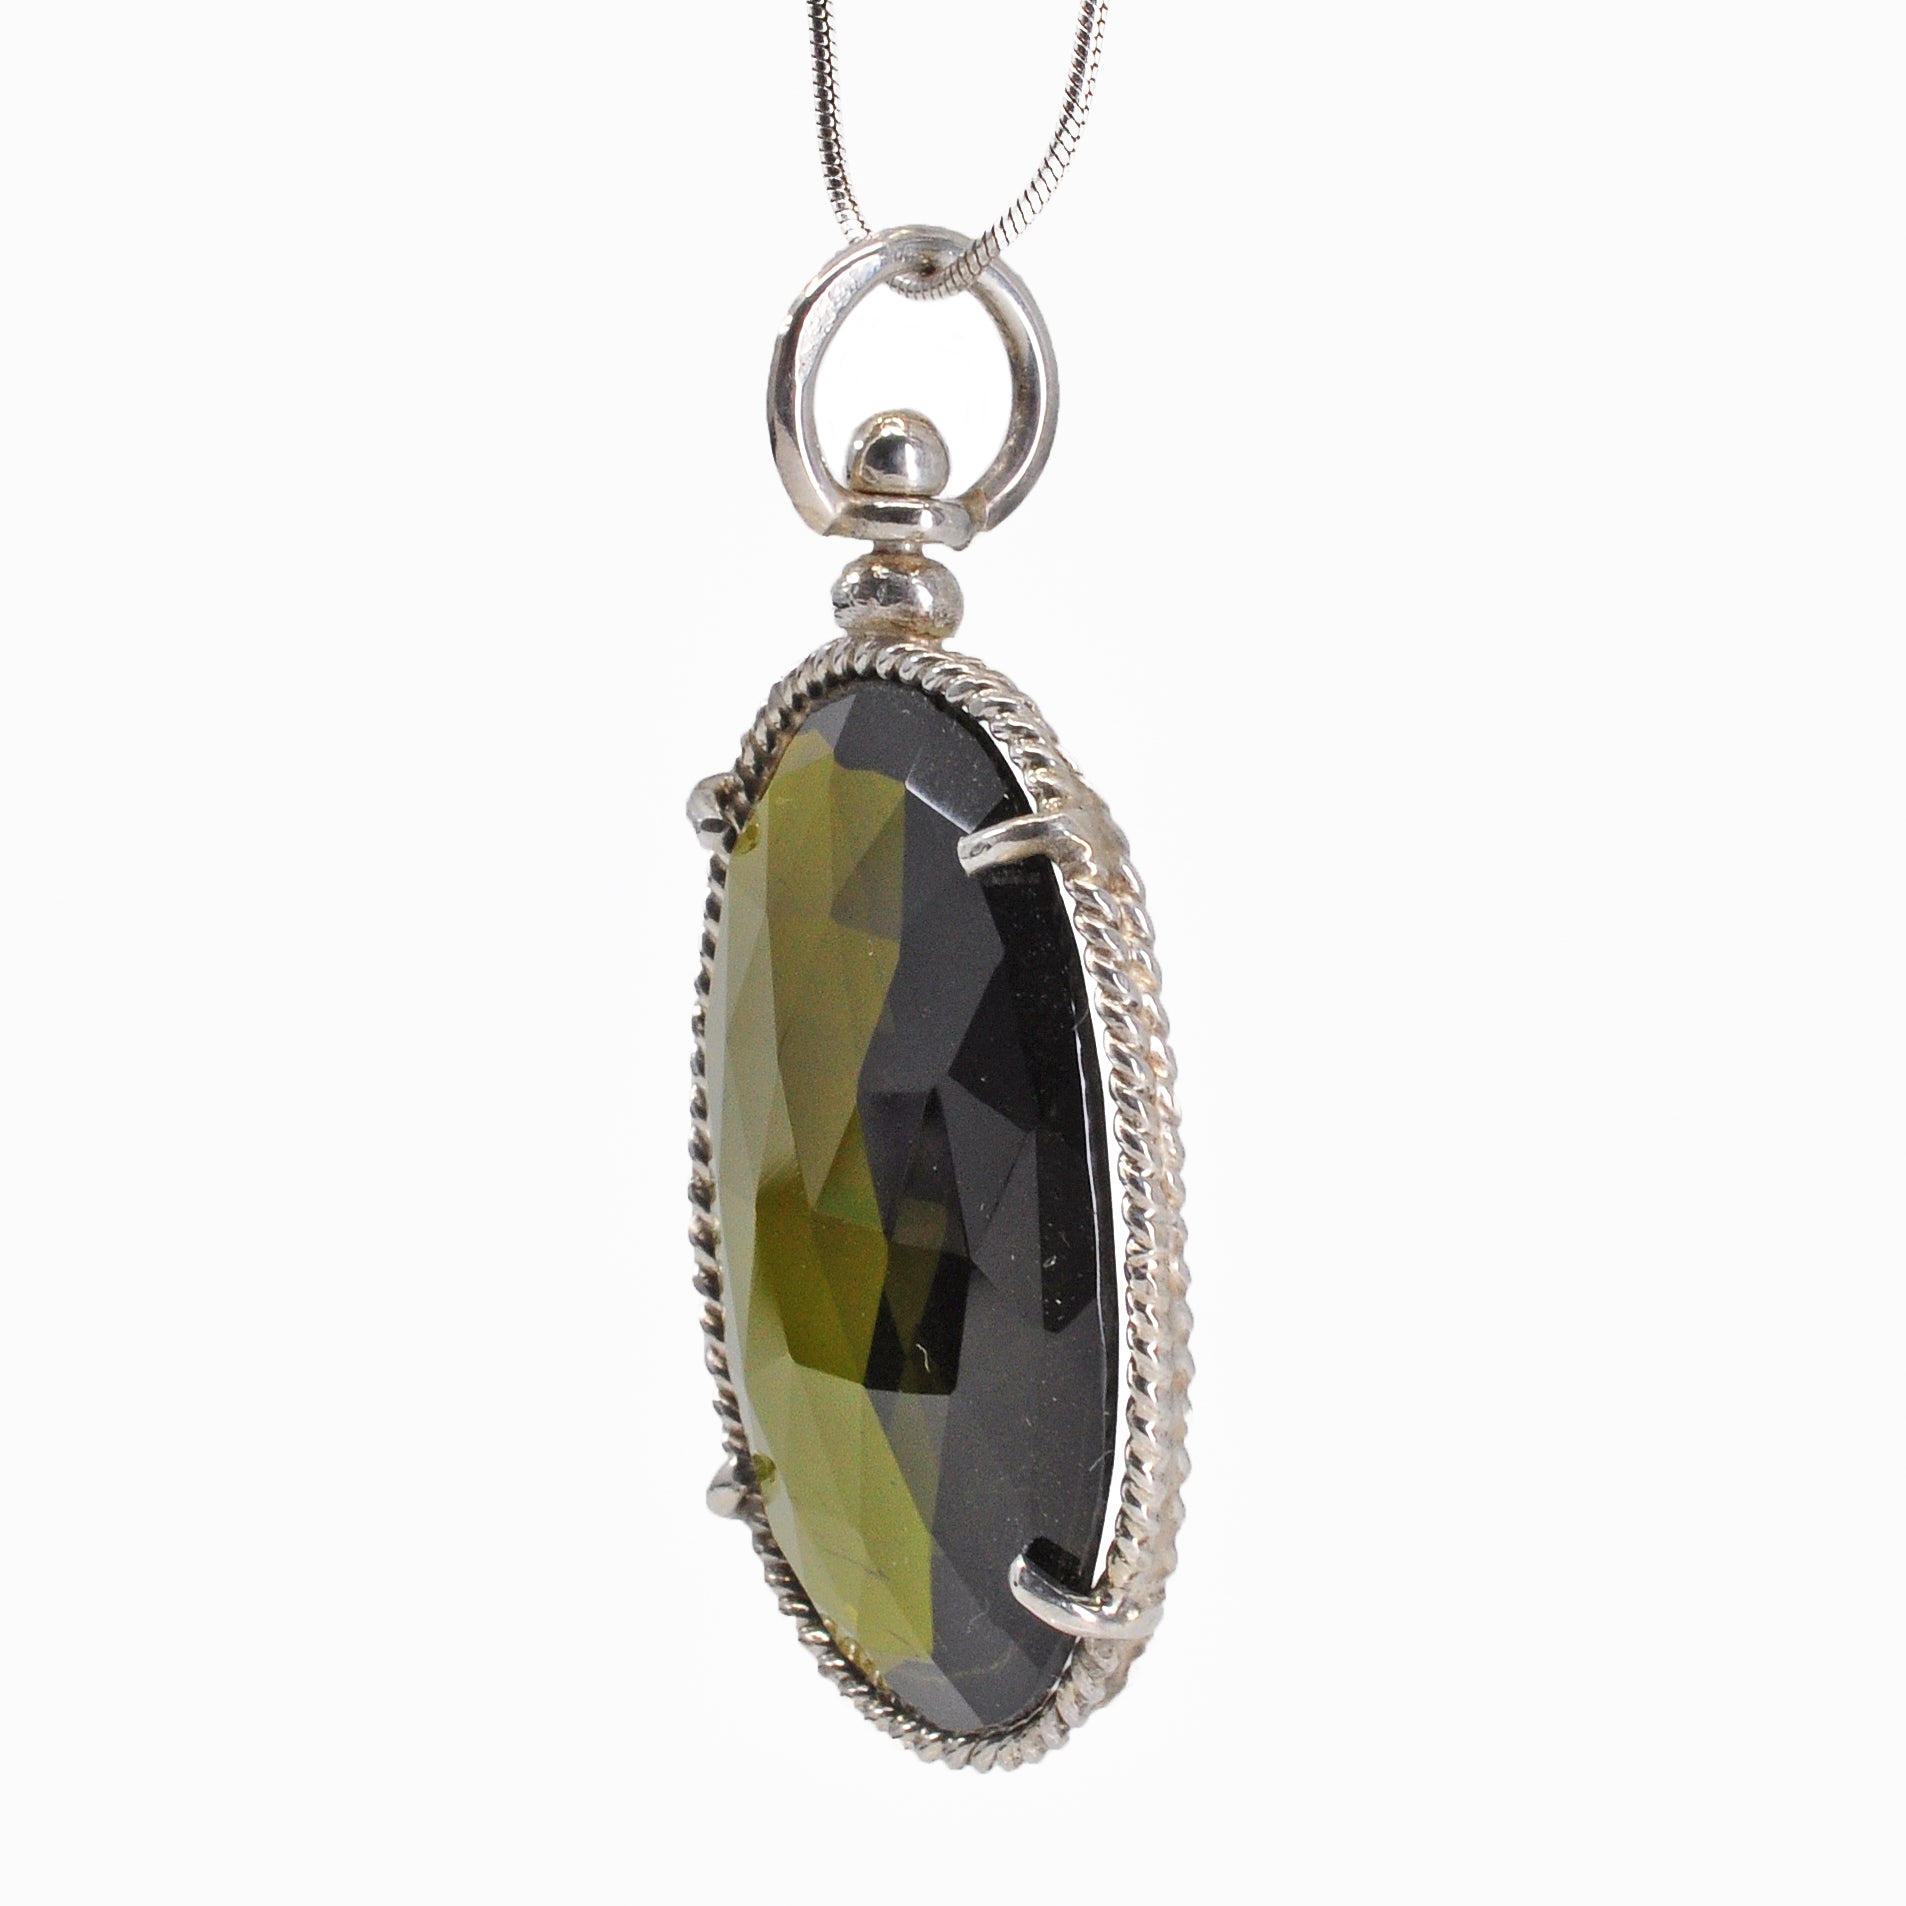 Green Tourmaline 28.07 mm 18.62 carats Faceted Oval Sterling Silver Handcrafted Pendant - FFO-138 - Crystalarium